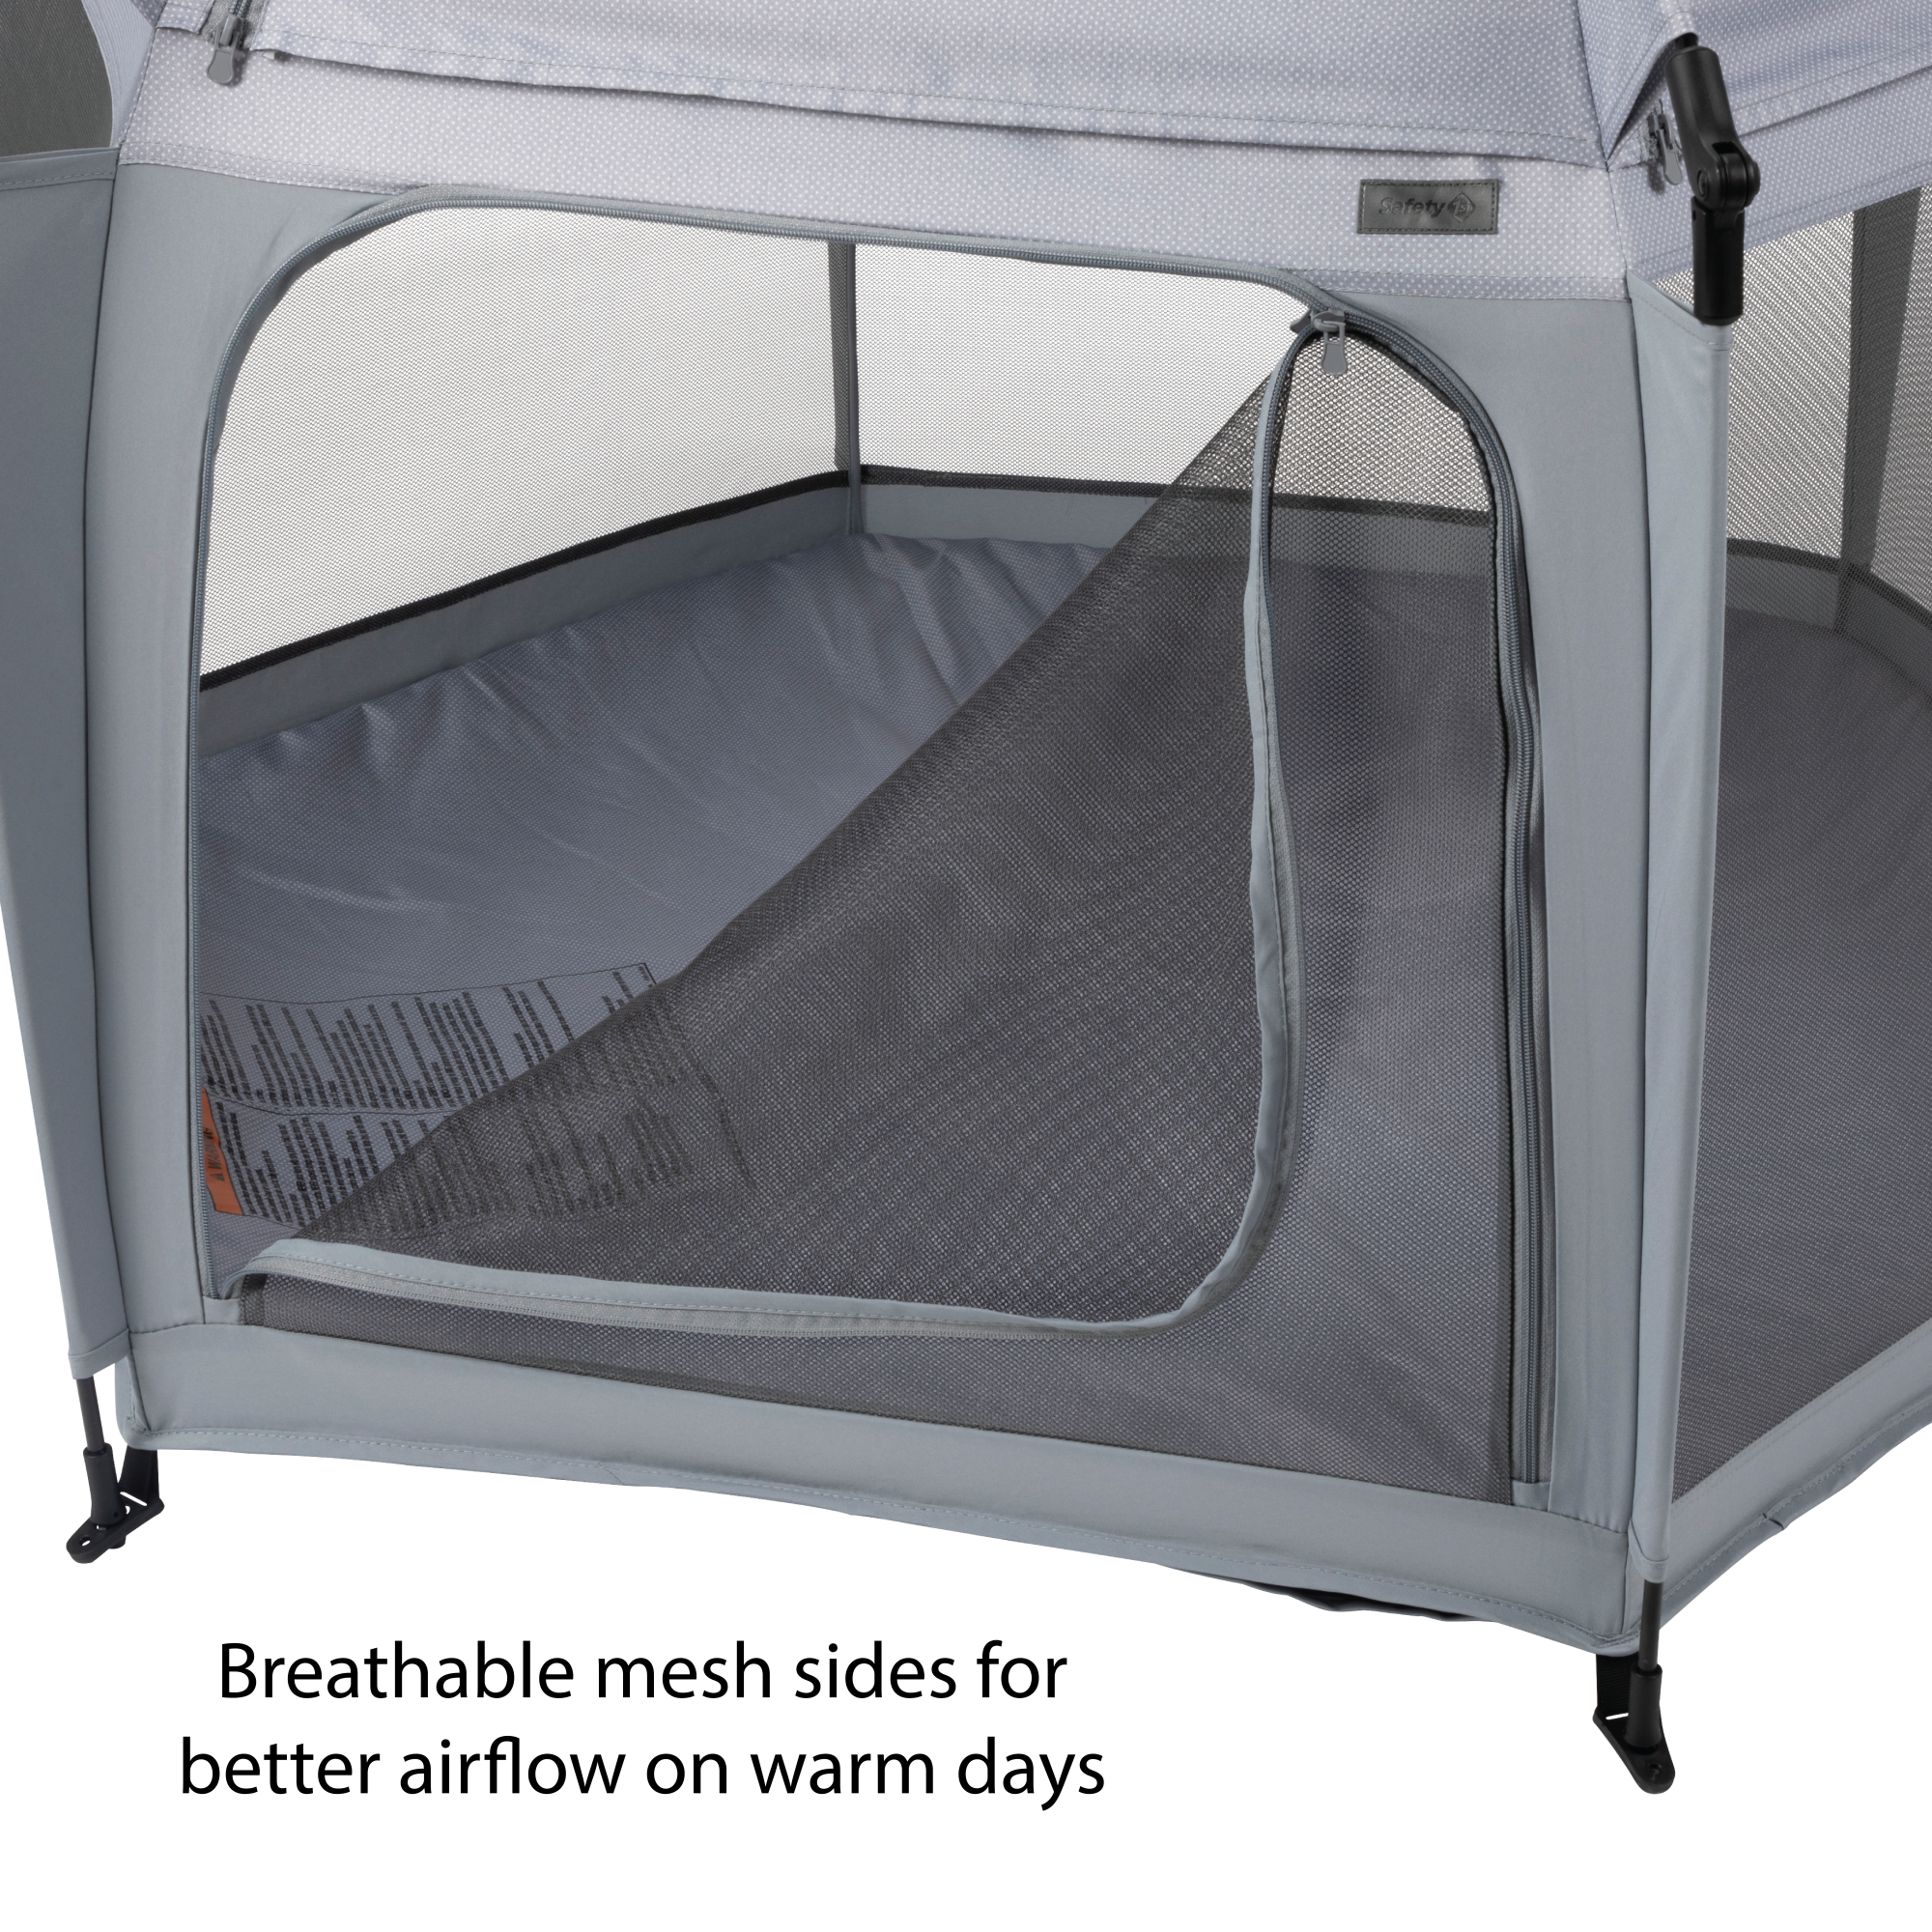 InstaPop Dome Play Yard - breathable mesh sides for better airflow on warm days